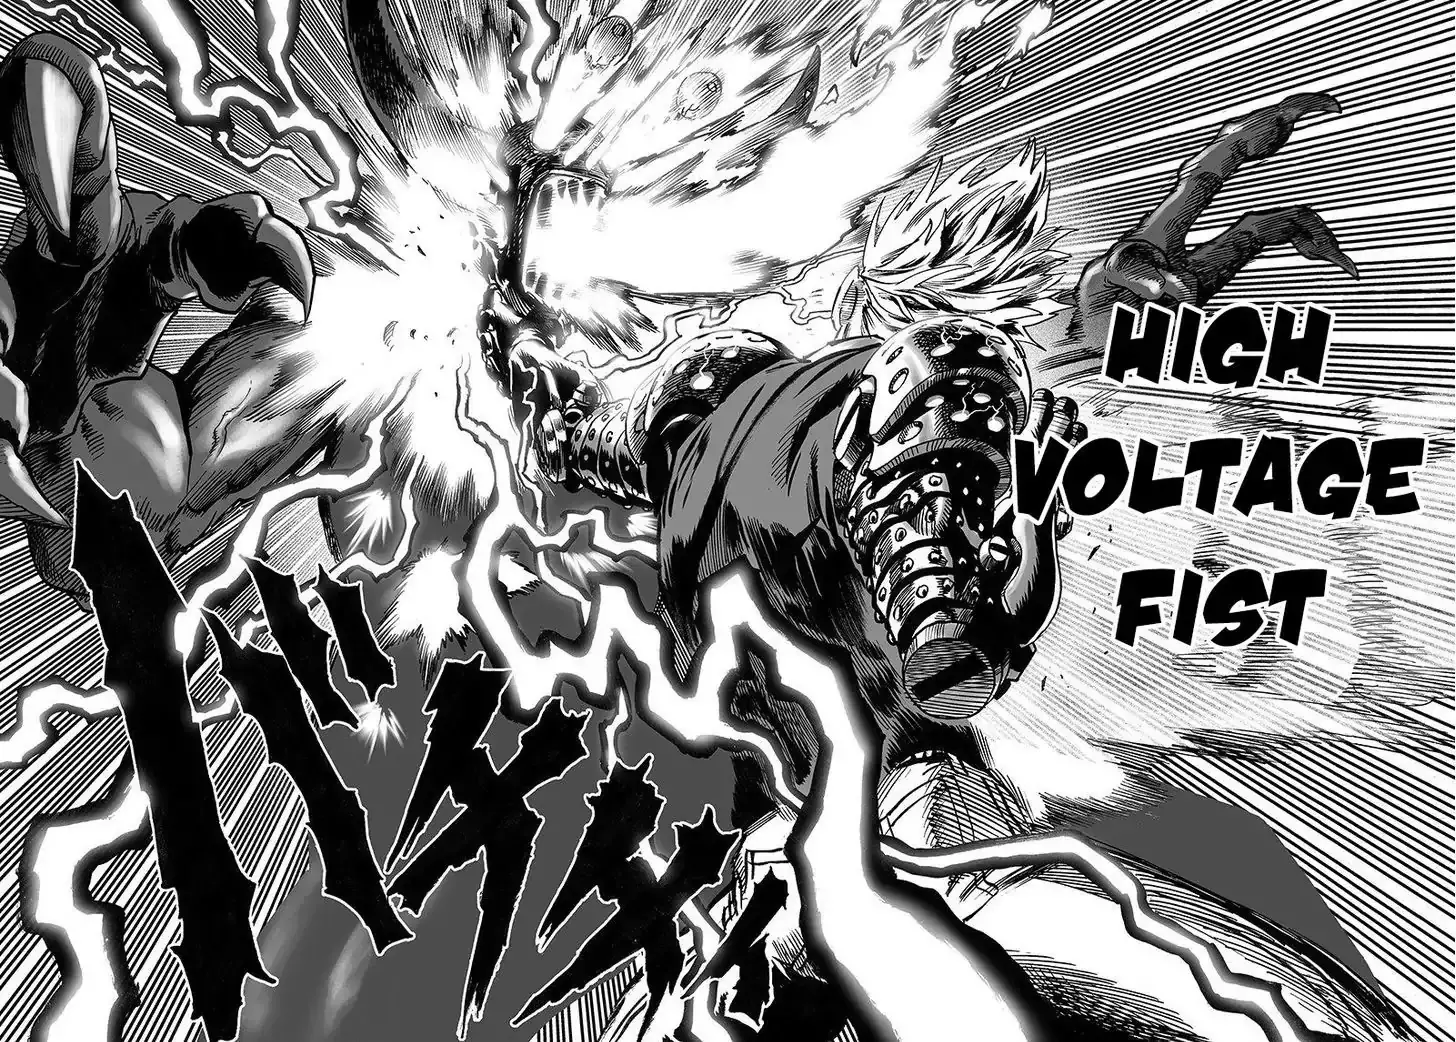 One Punch Man Chapter 63.1, READ One Punch Man Chapter 63.1 ONLINE, lost in the cloud genre,lost in the cloud gif,lost in the cloud girl,lost in the cloud goods,lost in the cloud goodreads,lost in the cloud,lost ark cloud gaming,lost odyssey cloud gaming,lost in the cloud fanart,lost in the cloud fanfic,lost in the cloud fandom,lost in the cloud first kiss,lost in the cloud font,lost in the cloud ending,lost in the cloud episode 97,lost in the cloud edit,lost in the cloud explained,lost in the cloud dog,lost in the cloud discord server,lost in the cloud desktop wallpaper,lost in the cloud drawing,can't find my cloud on network,lost in the cloud characters,lost in the cloud chapter 93 release date,lost in the cloud birthday,lost in the cloud birthday art,lost in the cloud background,lost in the cloud banner,lost in the clouds meaning,what is the black cloud in lost,lost in the cloud ao3,lost in the cloud anime,lost in the cloud art,lost in the cloud author twitter,lost in the cloud author instagram,lost in the cloud artist,lost in the cloud acrylic stand,lost in the cloud artist twitter,lost in the cloud art style,lost in the cloud analysis